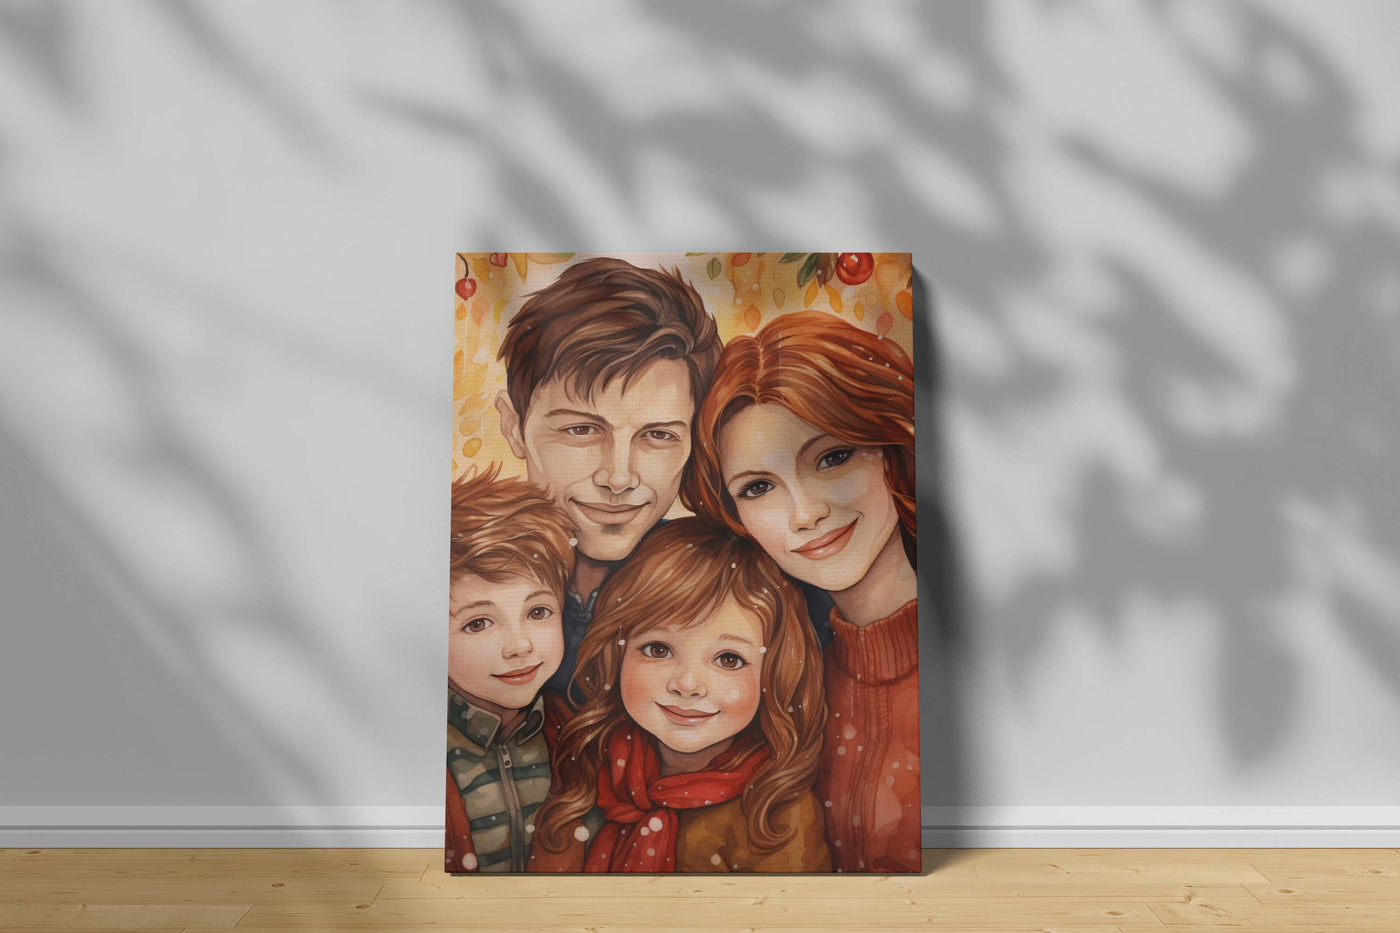 Personalized Canvas Print Online